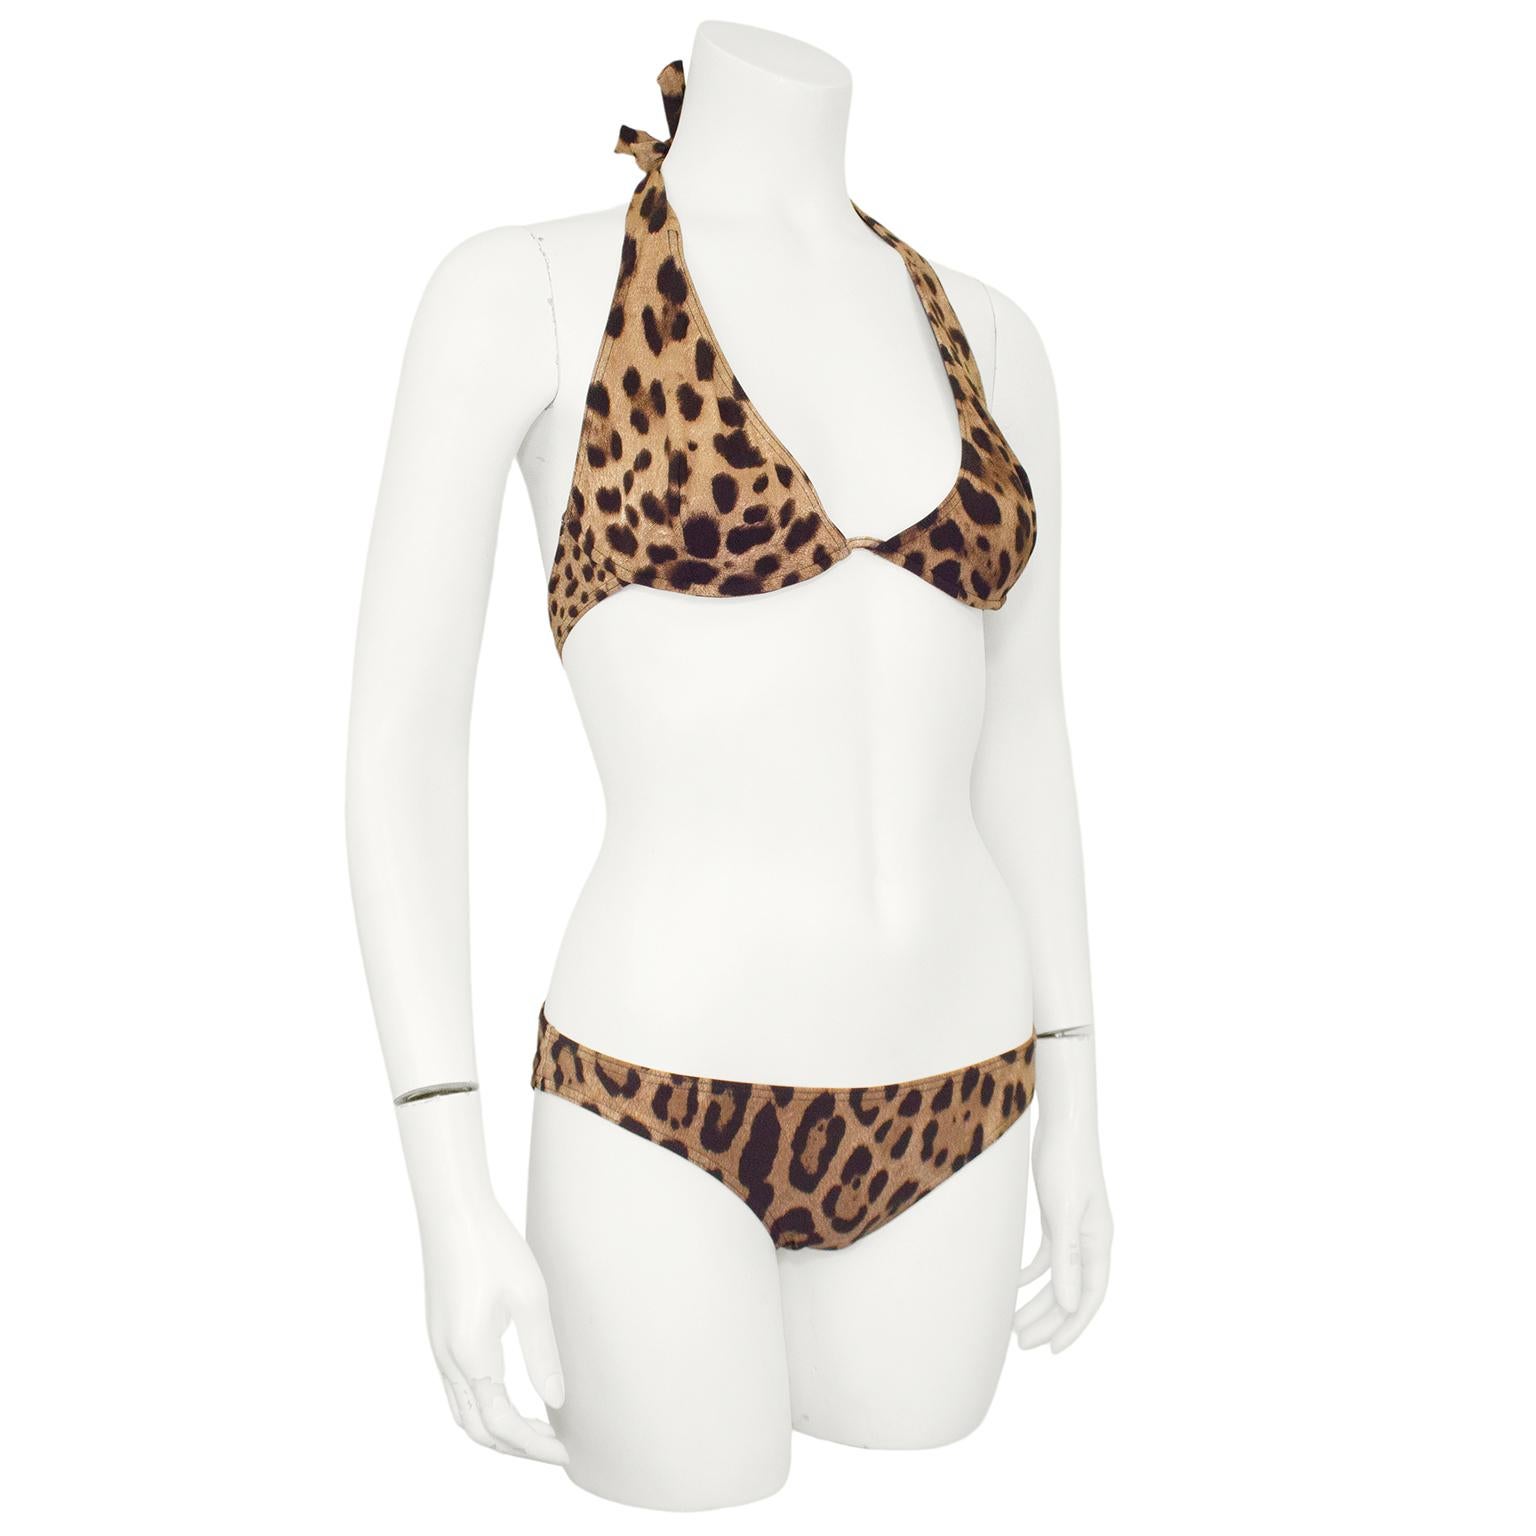 Very fun 2000s Dolce and Gabbana Beachwear leopard print bikini. Halter tie top with underwires and interlocking DG gold tone metal clasp. Low rise bikini bottom. Black lining. Marked size 3, fits like a US size 2-4. Made in Italy. Excellent vintage